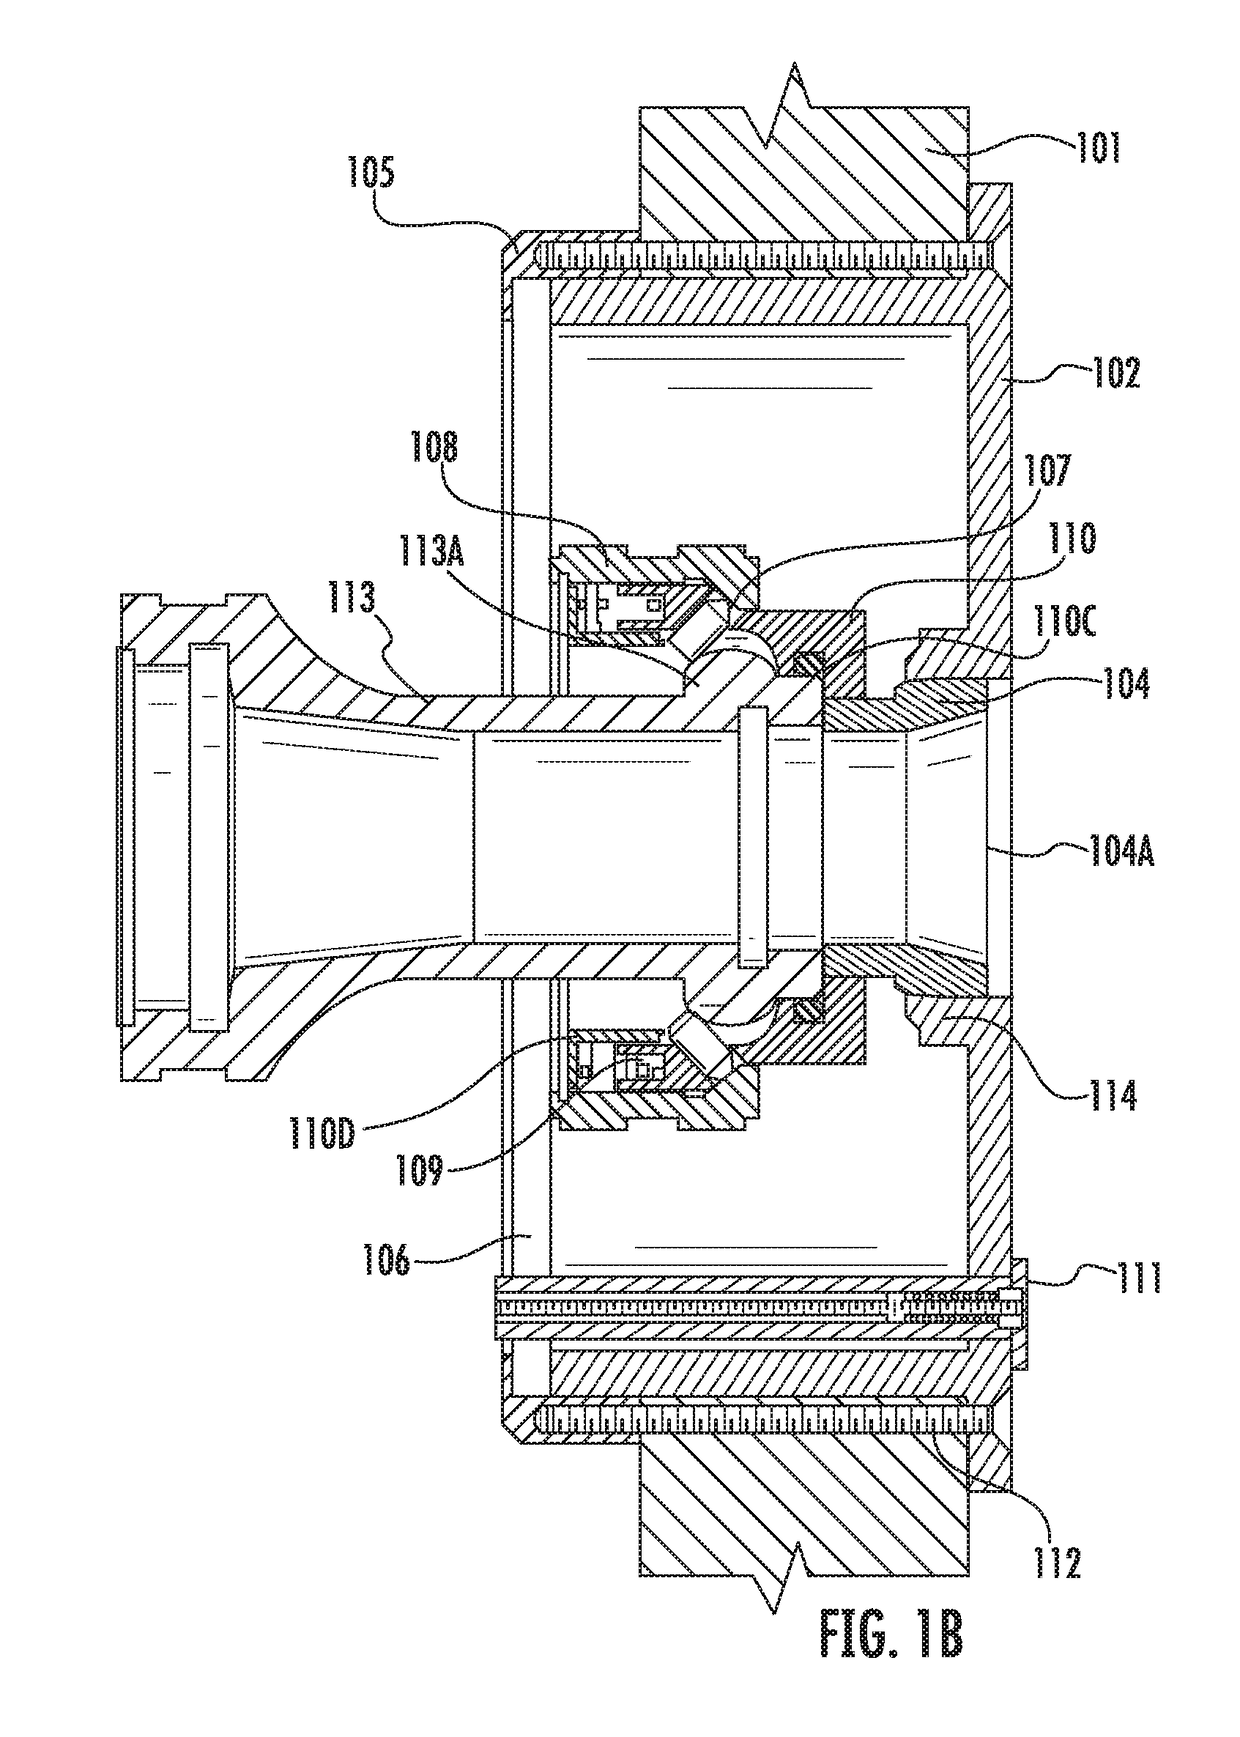 Structurally-installed access device for accepting connection by a fire hose nozzle to introduce firefighting fluid into an enclosed space of a structure